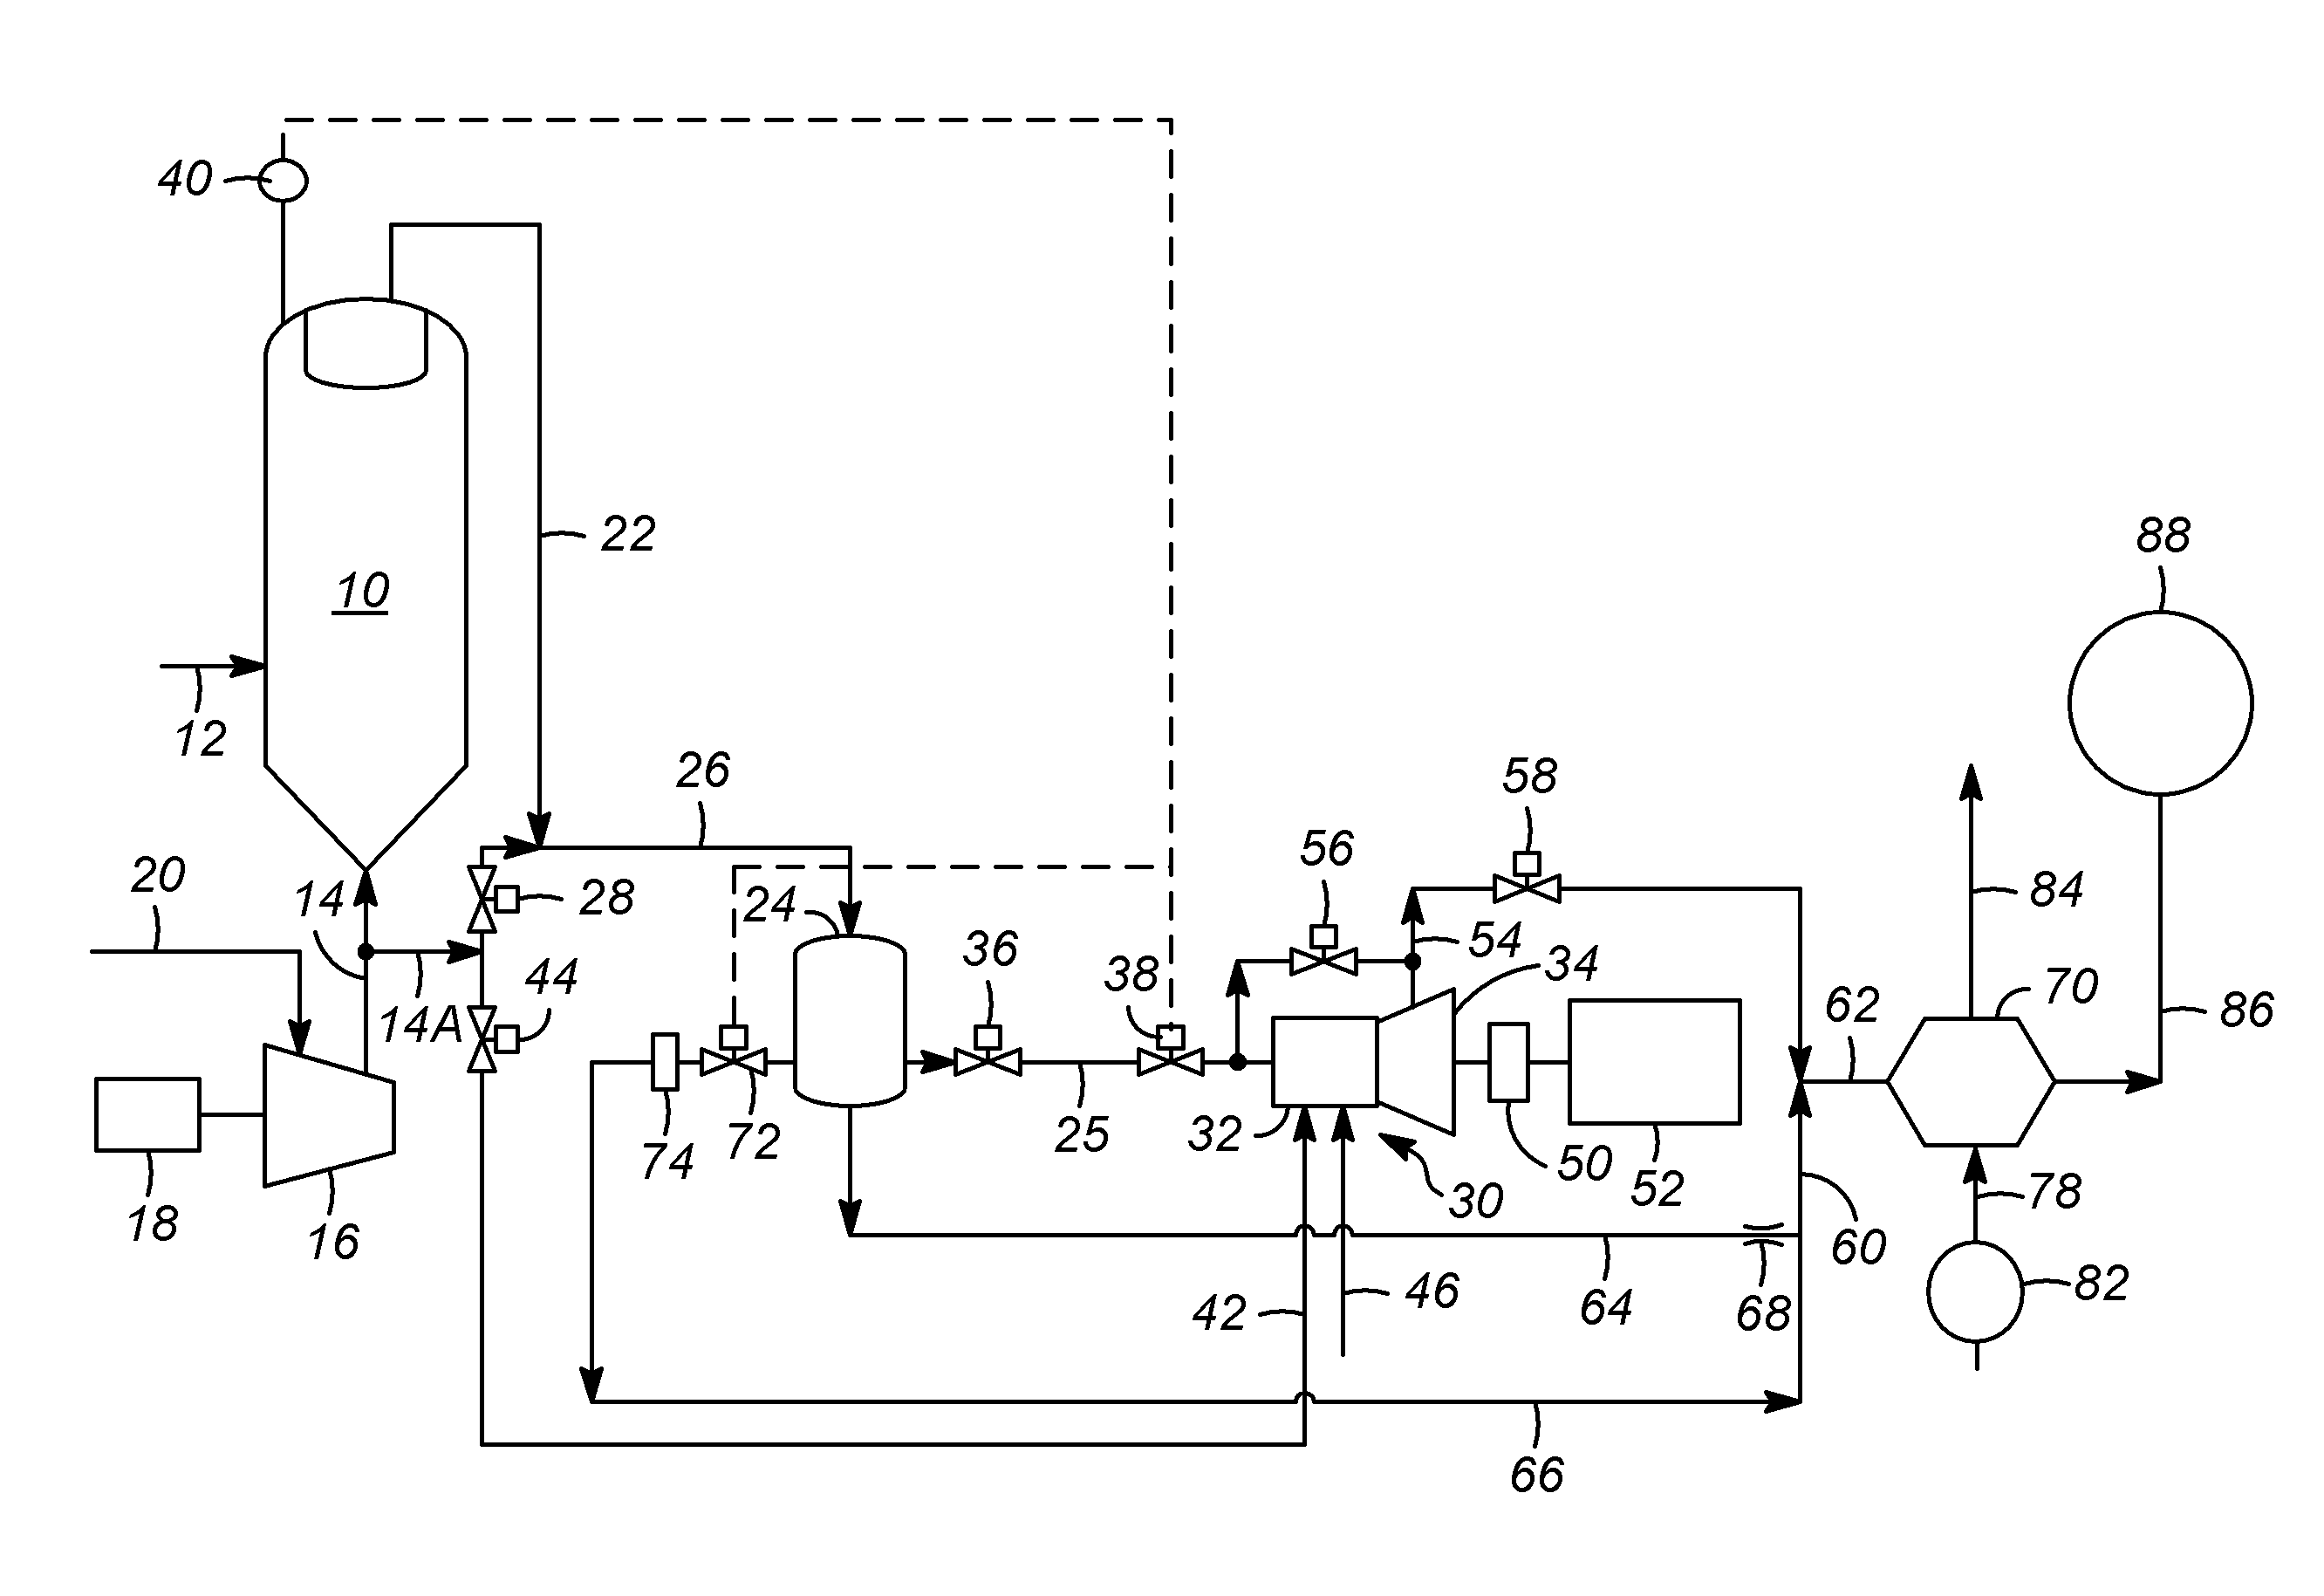 System and process for recovering power and steam from regenerator flue gas